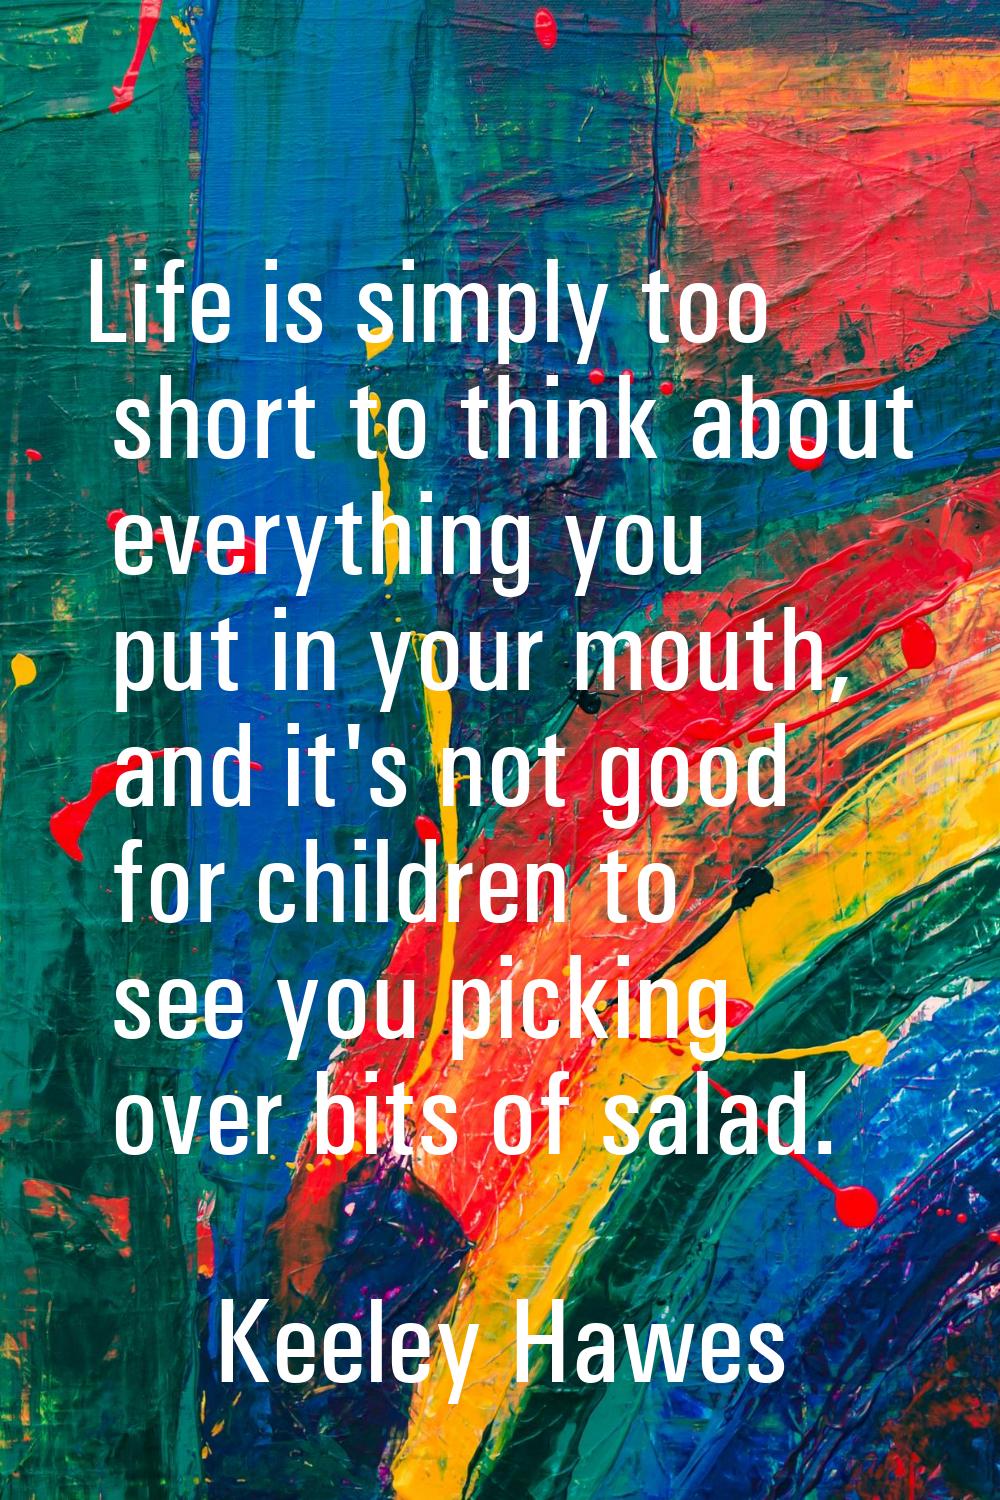 Life is simply too short to think about everything you put in your mouth, and it's not good for chi